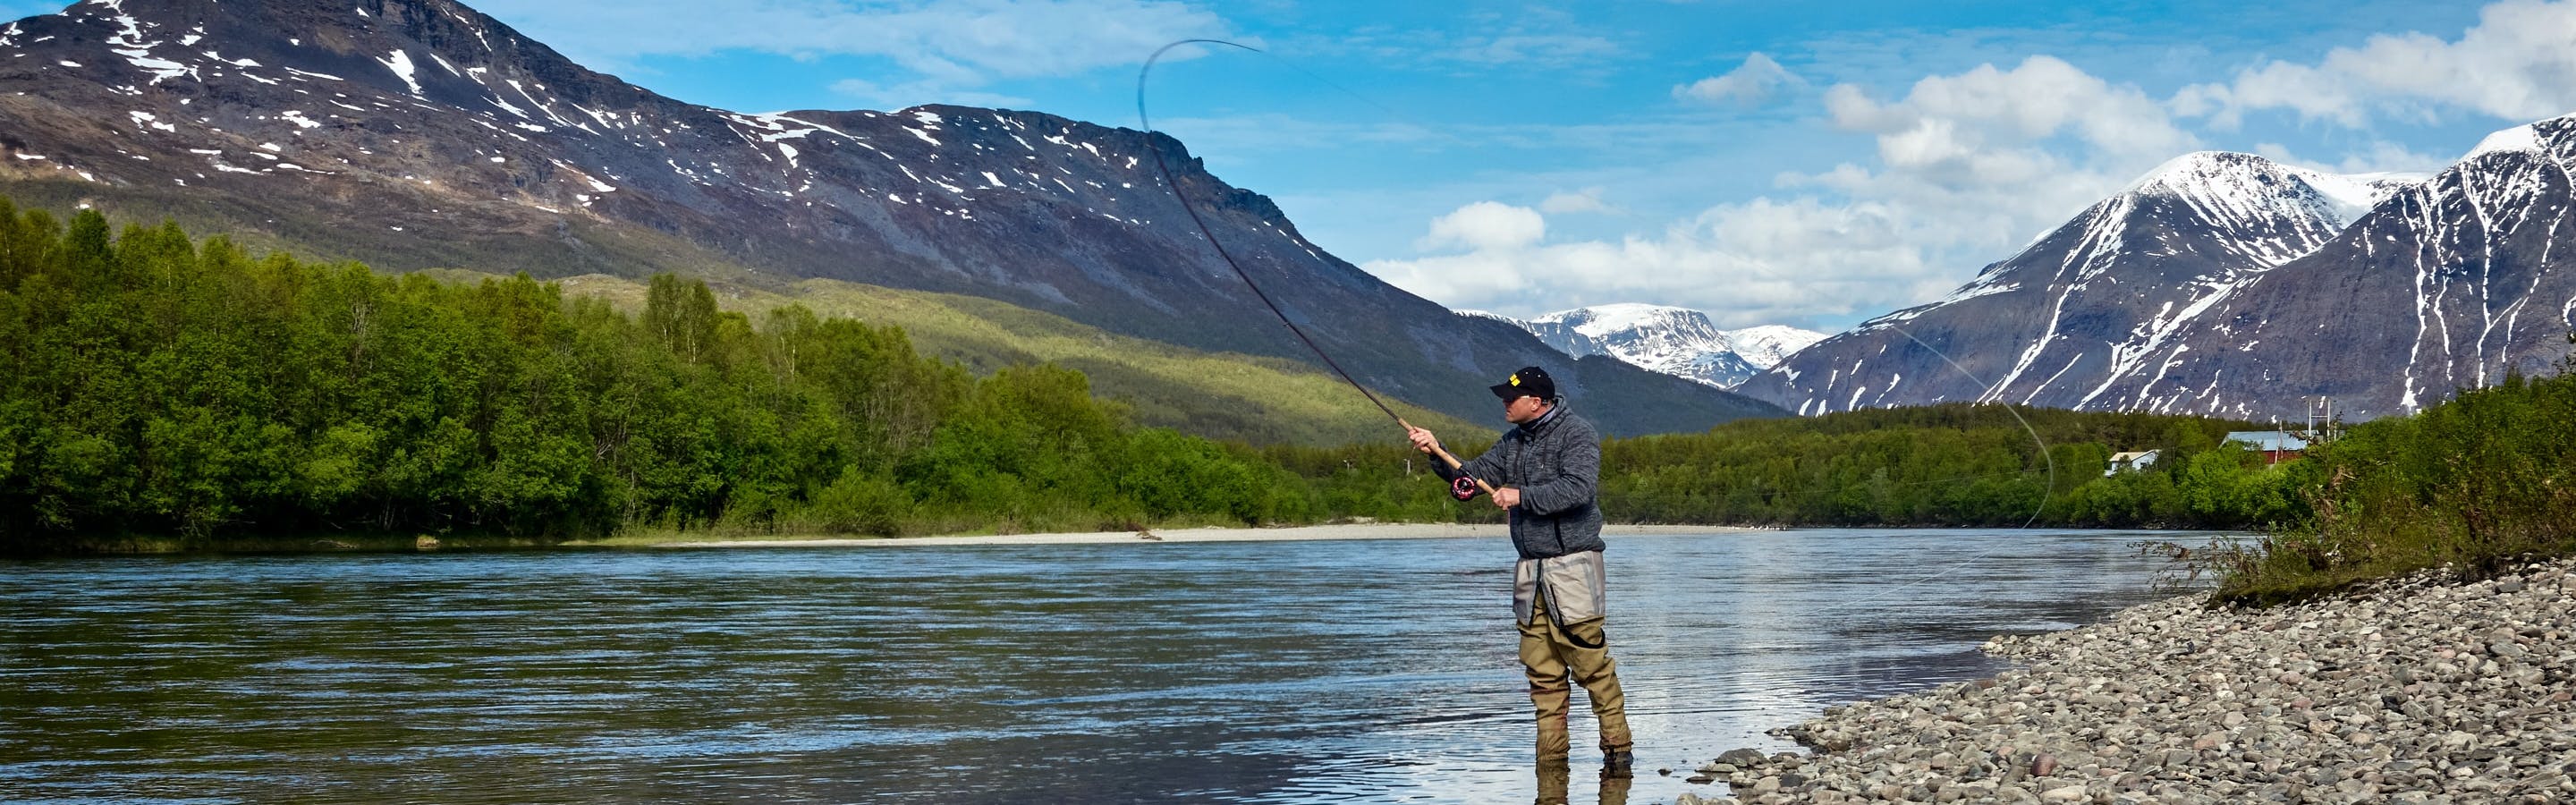 79 Best Fly Fishing Gifts ideas